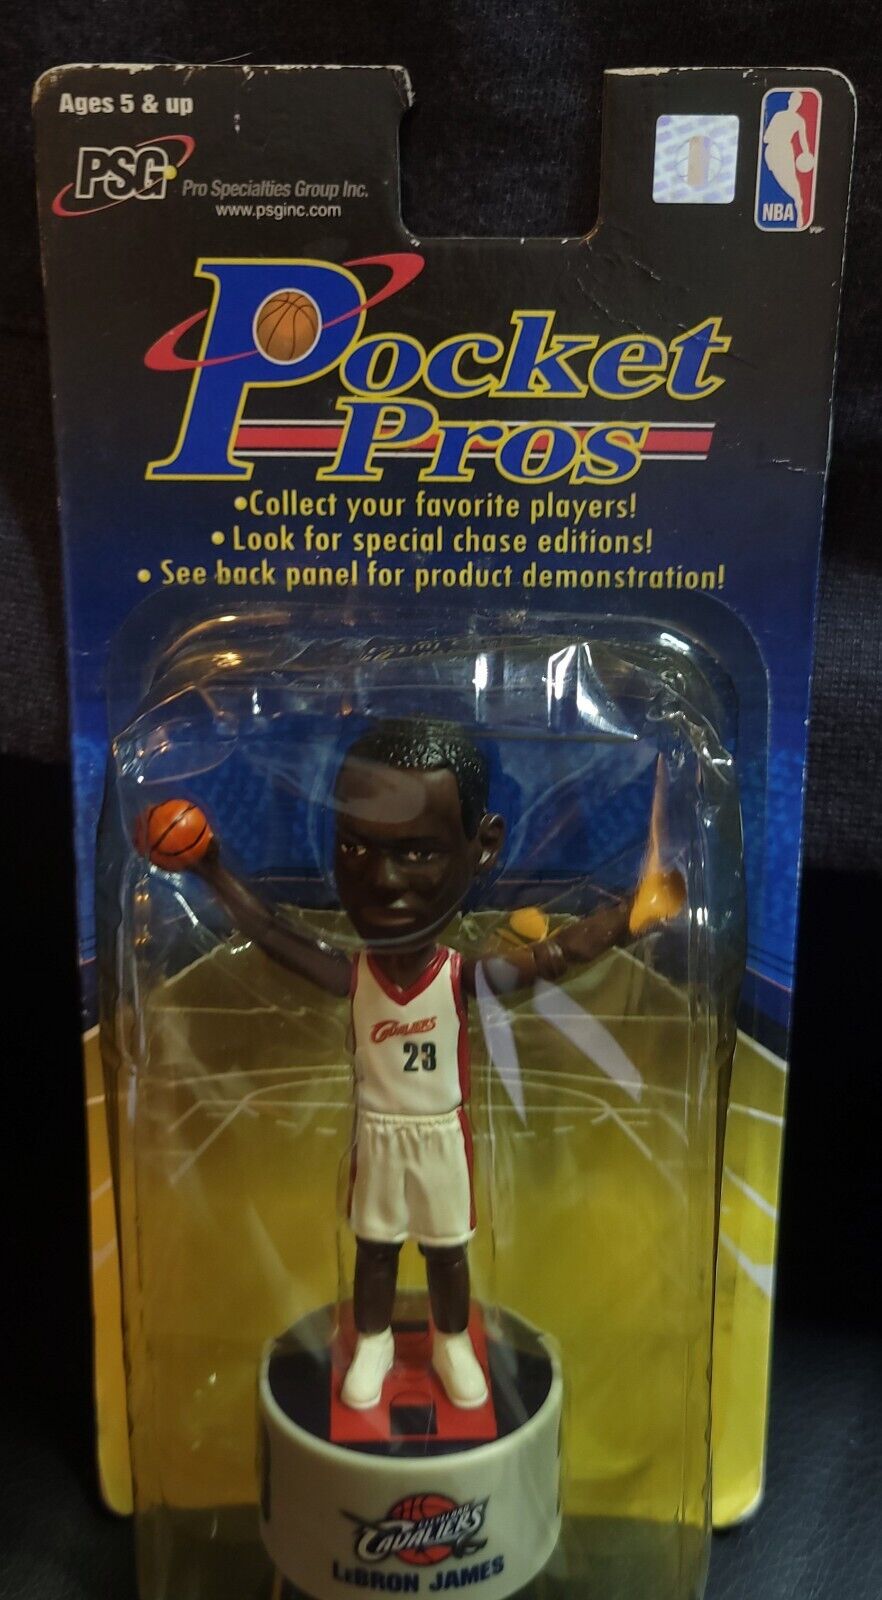 LEBRON JAMES 2003 Rookie Year POCKET PROS CLEVELAND CAVALIERS FIGURE NEW #23